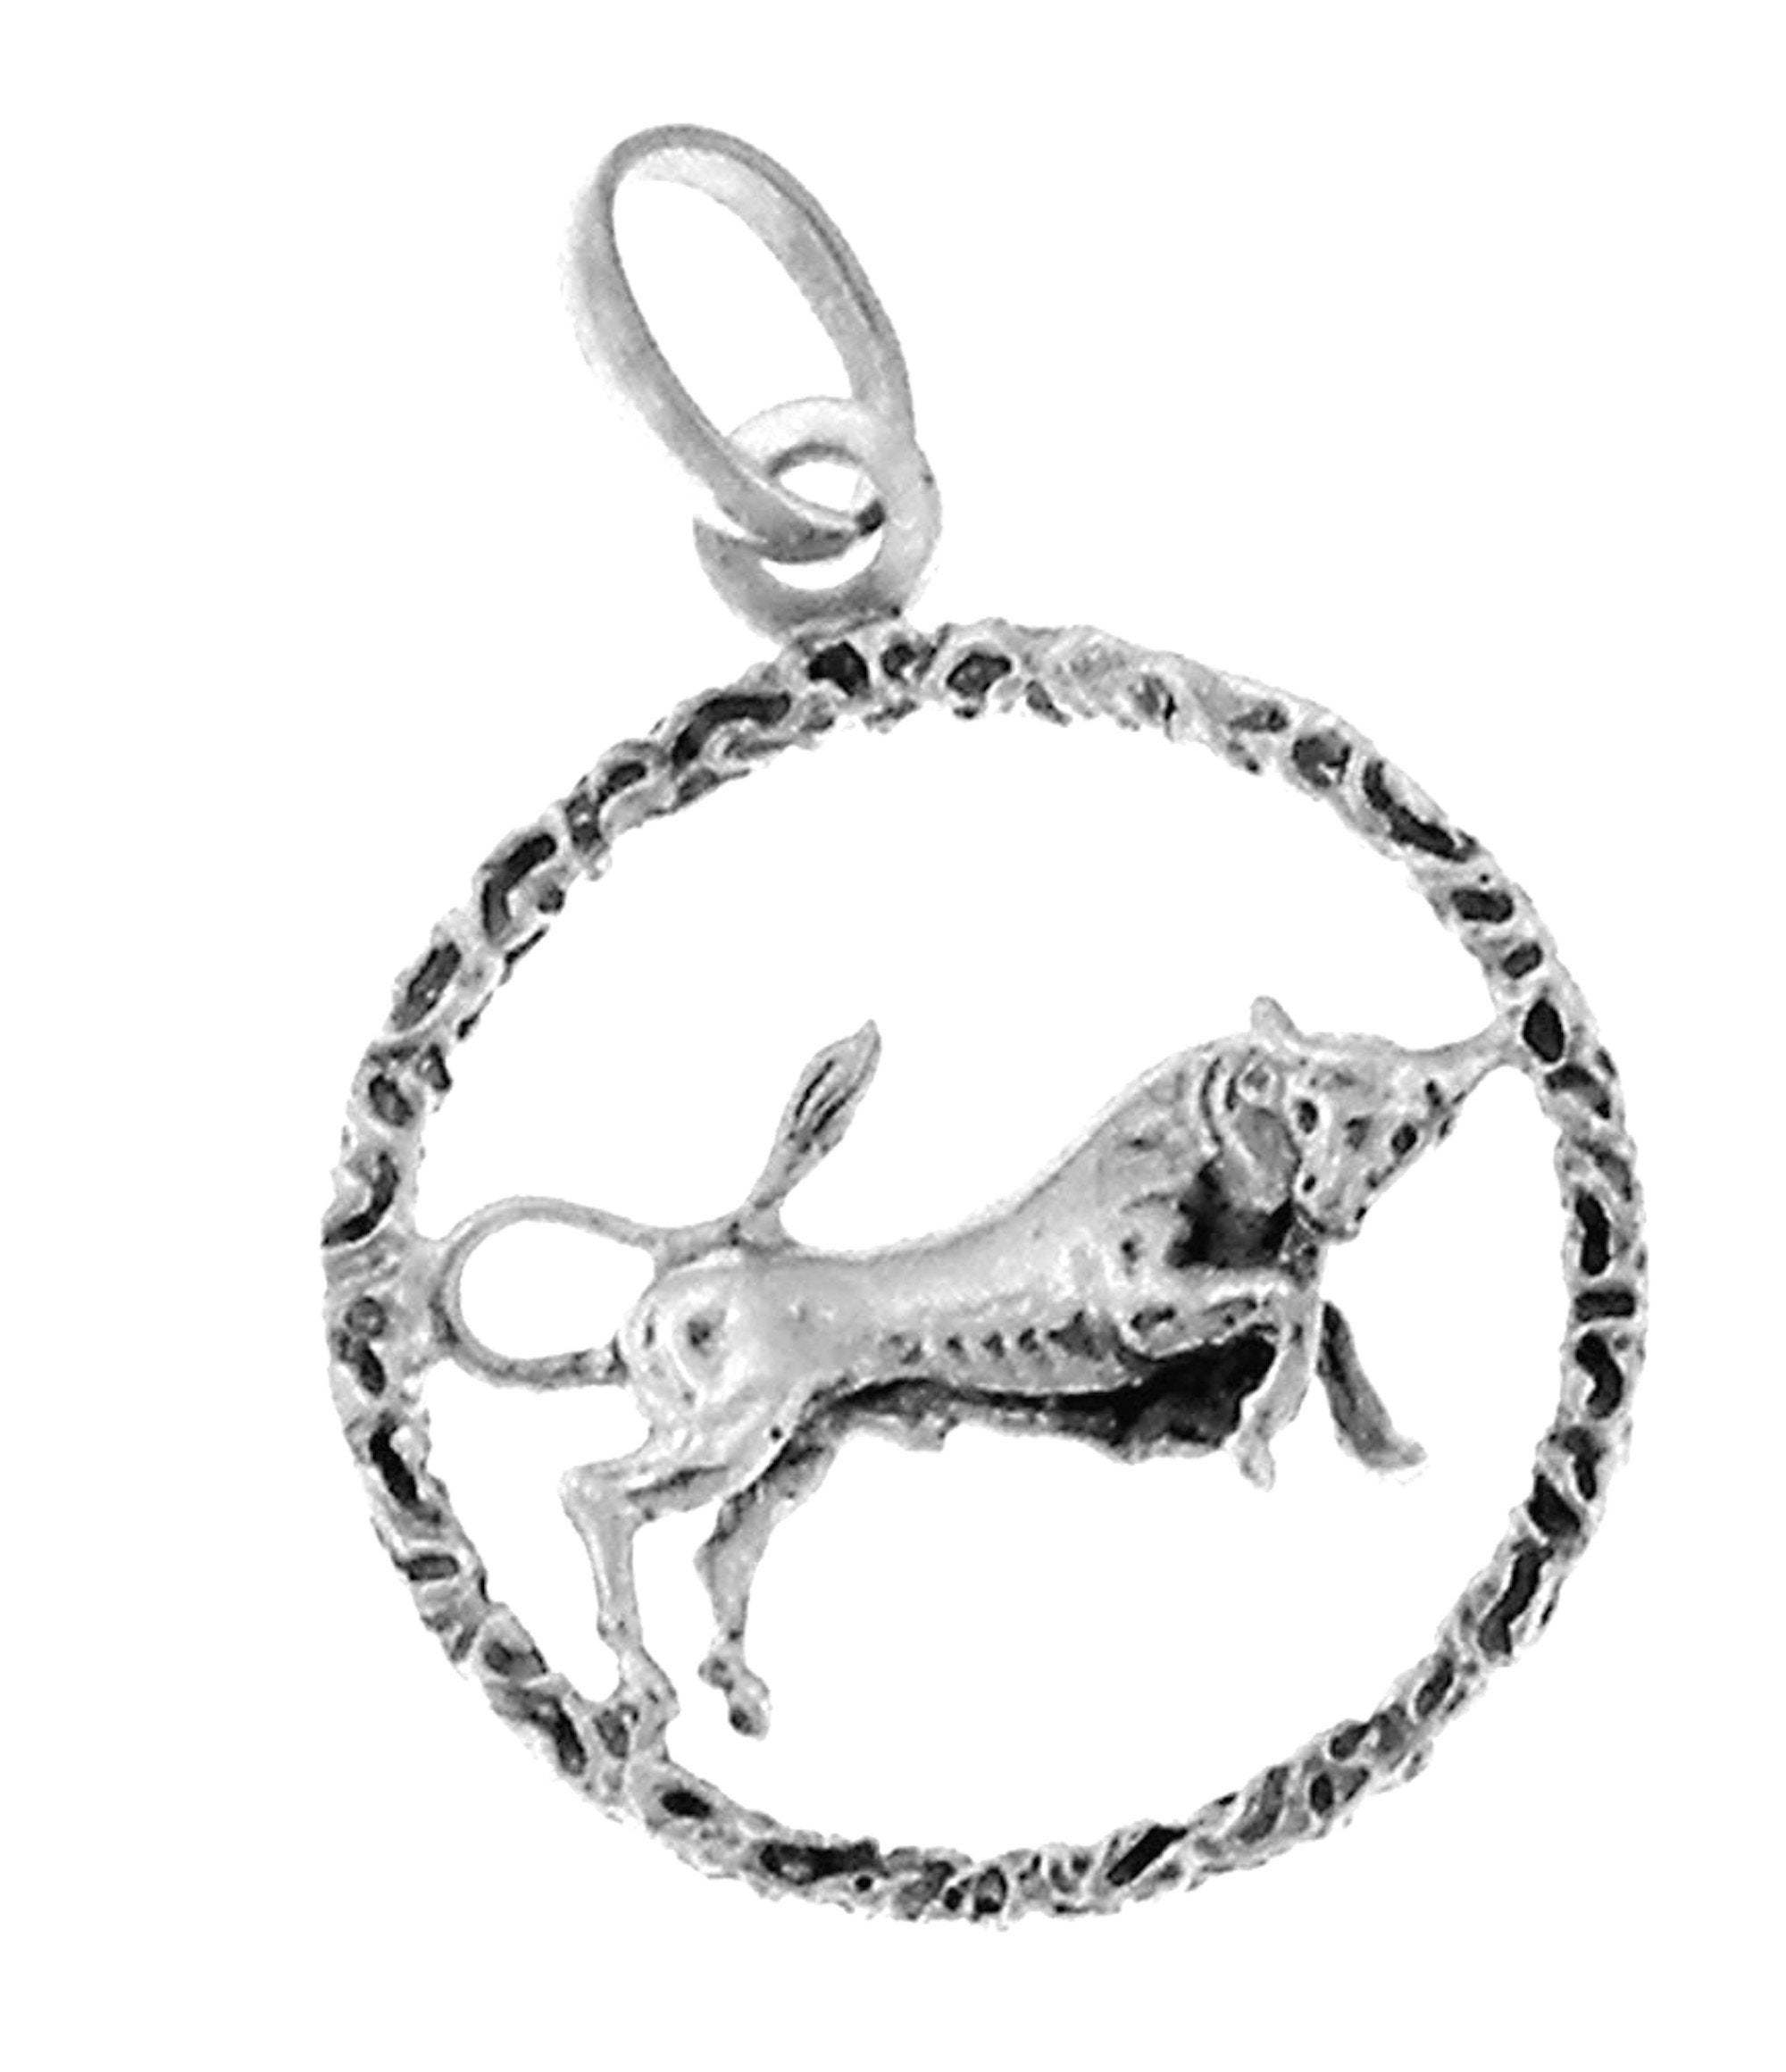 10 Antique Silver 2024 Metal Graduation New Year Pendant Jewelry Charms  with Loop for Hanging on Bracelet, Necklace, Anklet etc